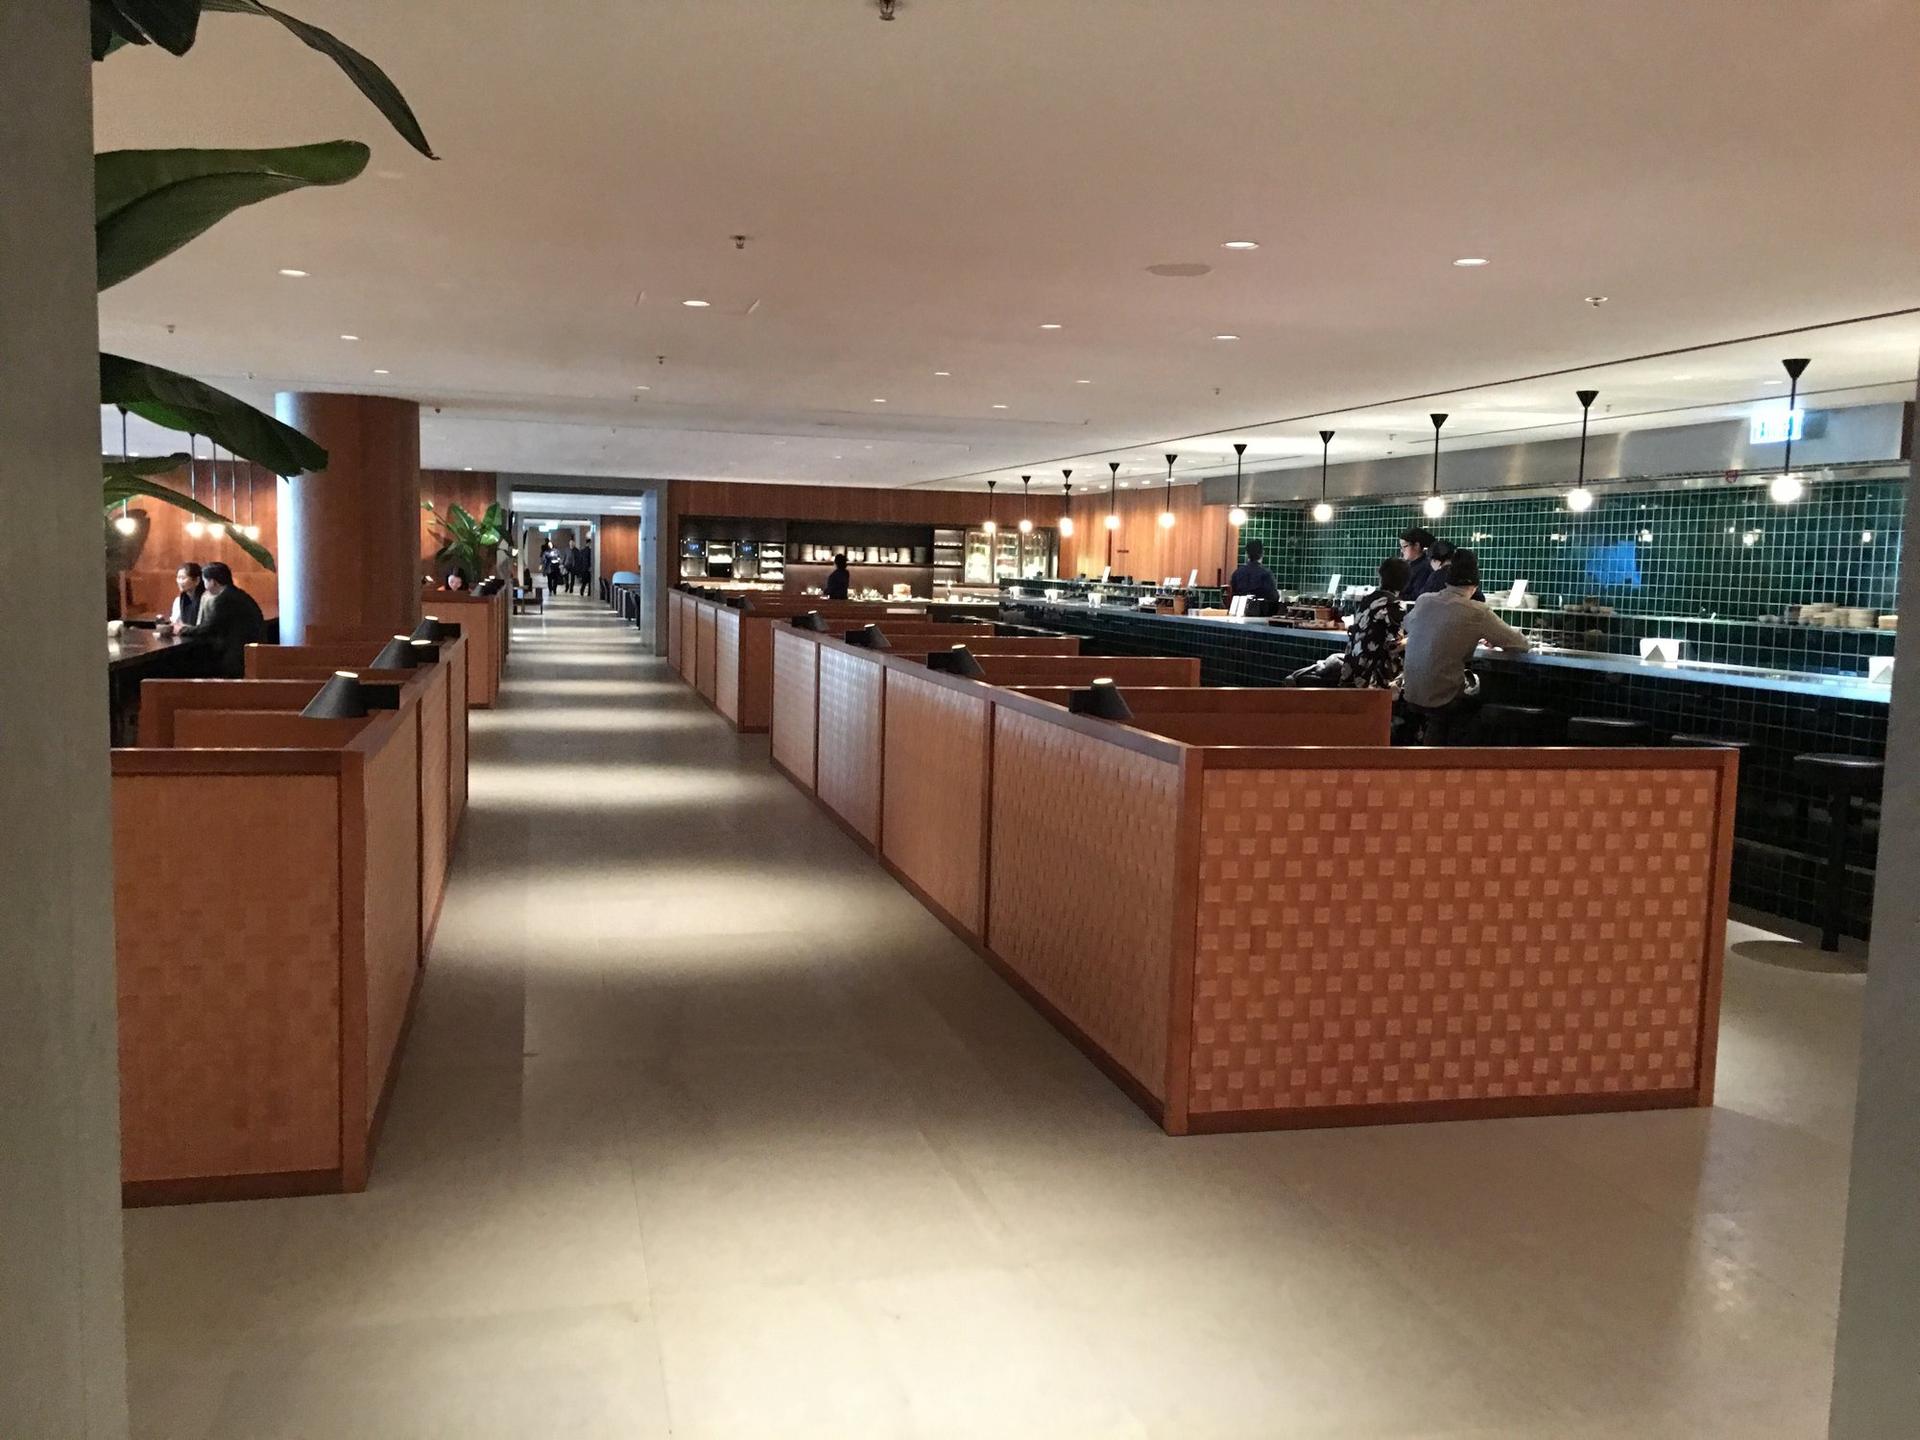 Cathay Pacific The Pier Business Class Lounge image 36 of 61